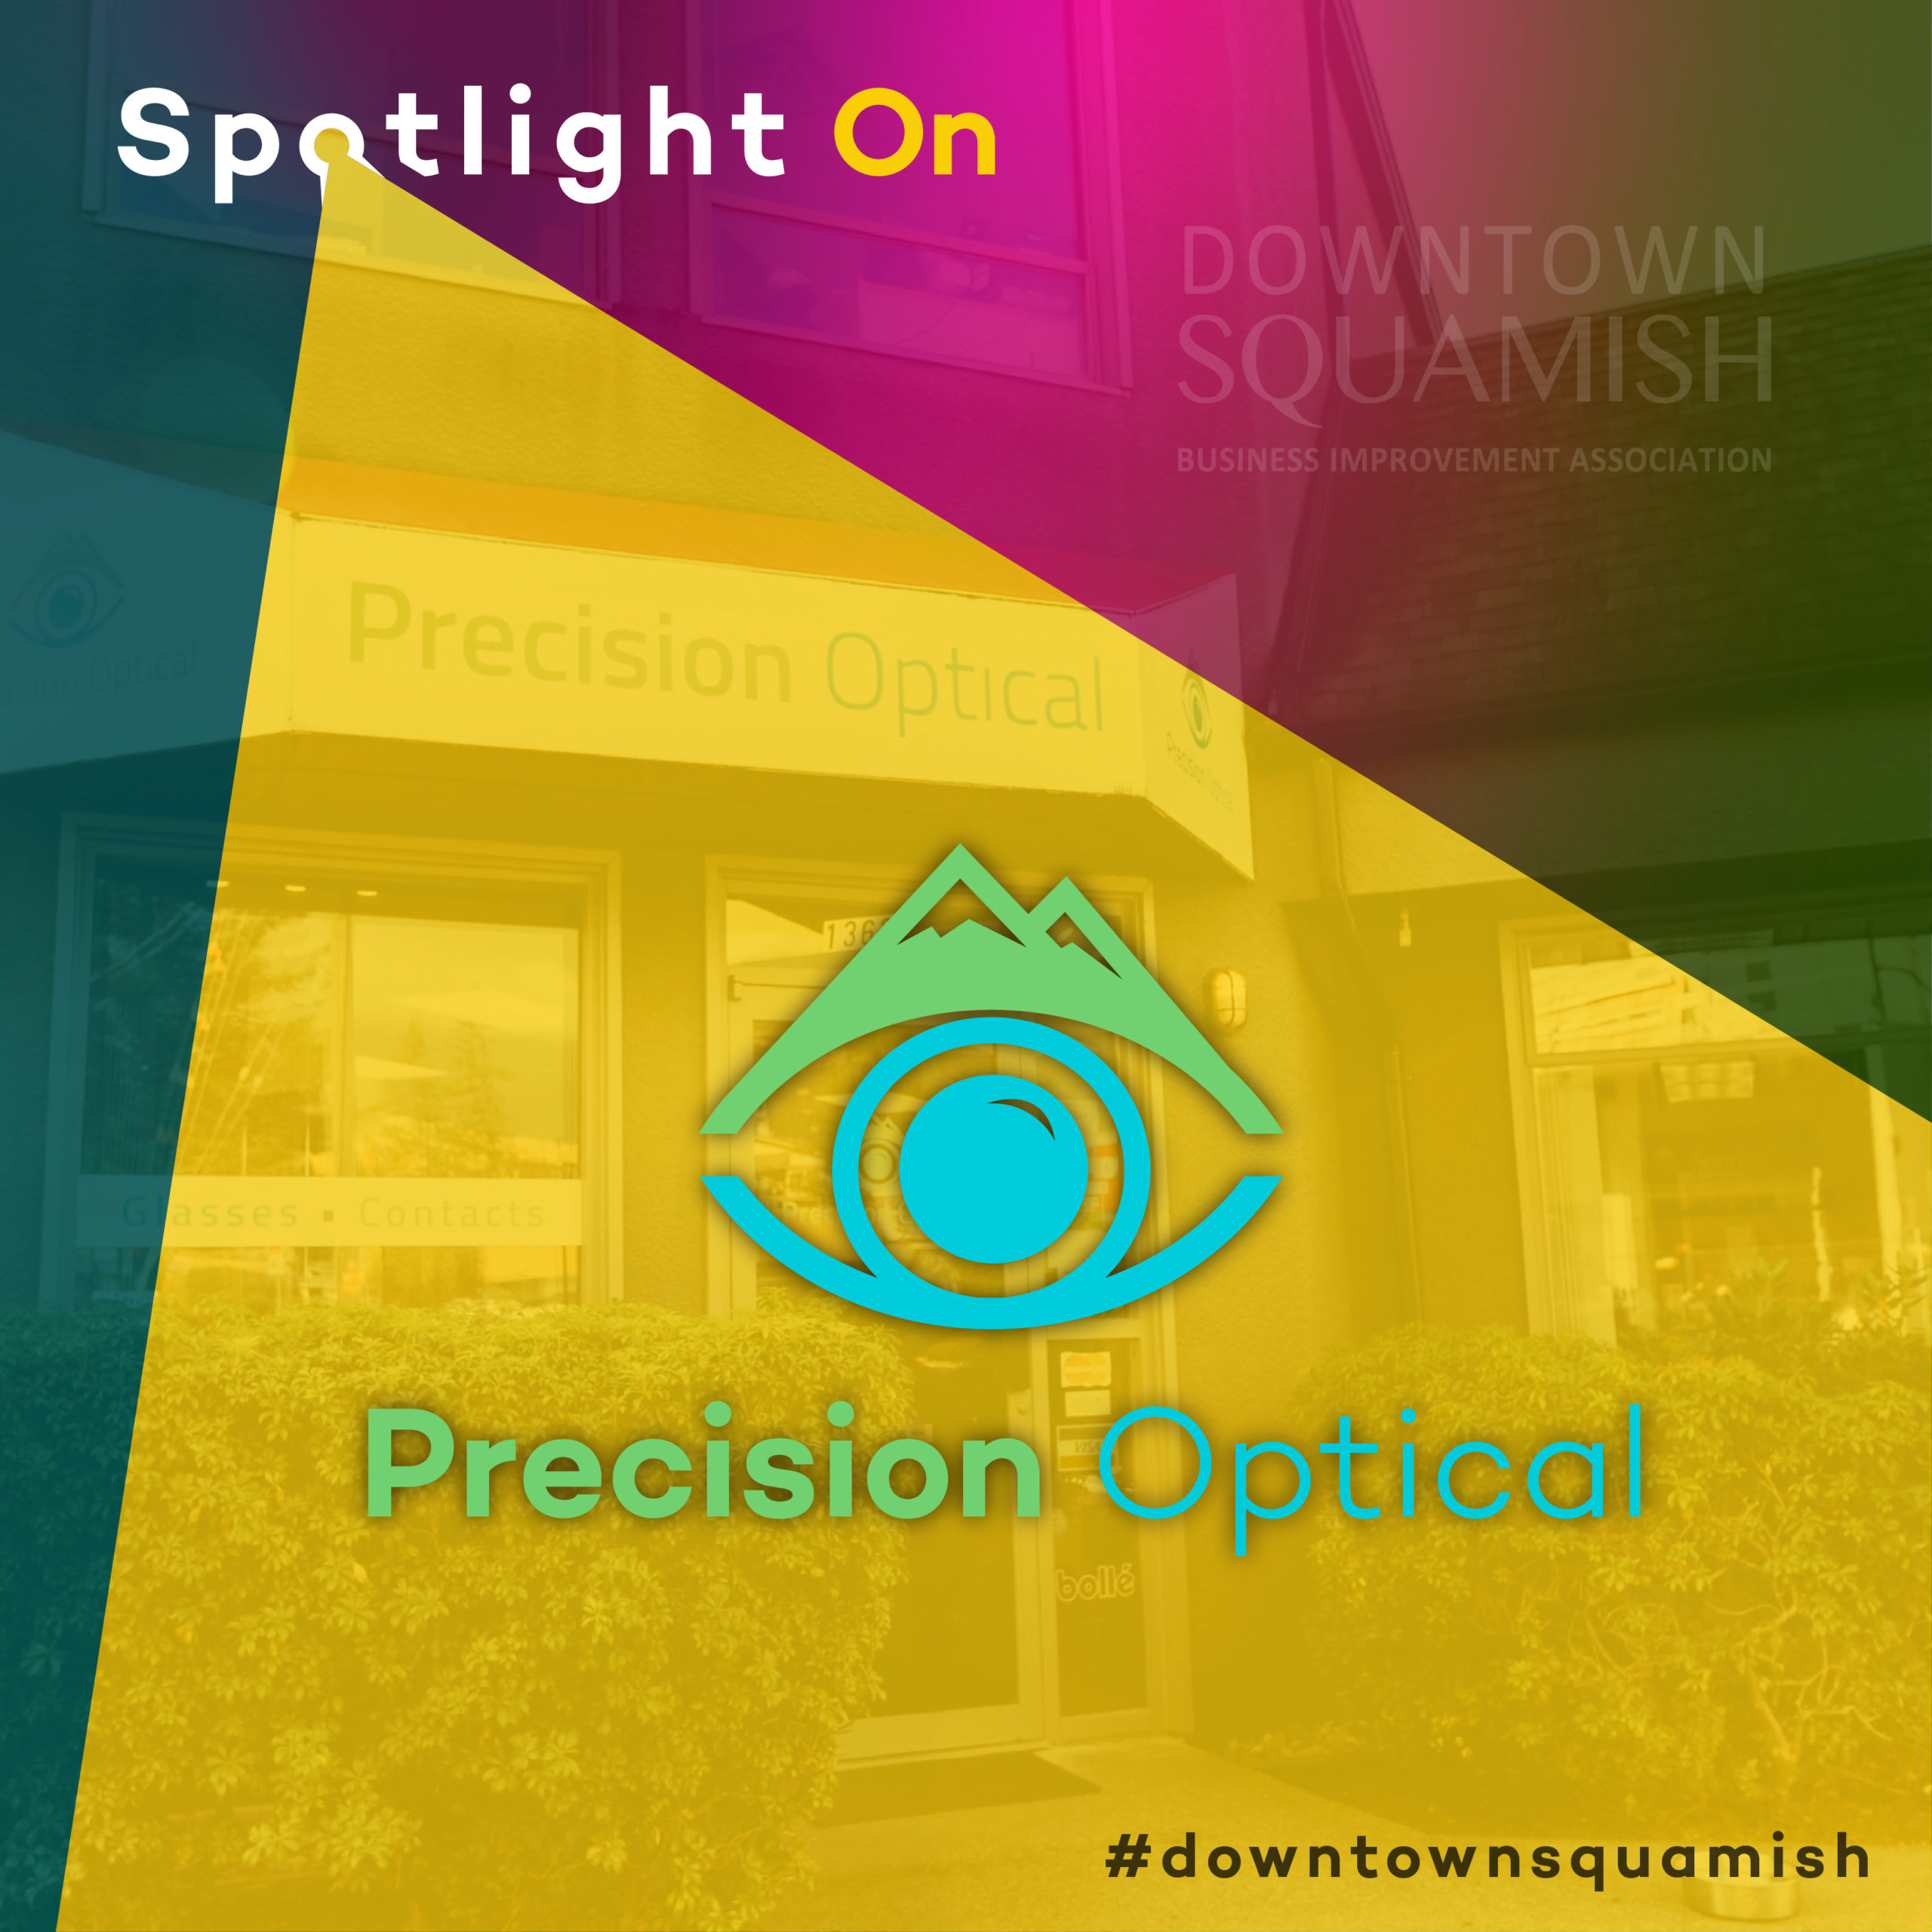 https://www.downtownsquamish.com/wp-content/uploads/2020/09/Spotlight_On_Precision_Optical-scaled.jpg